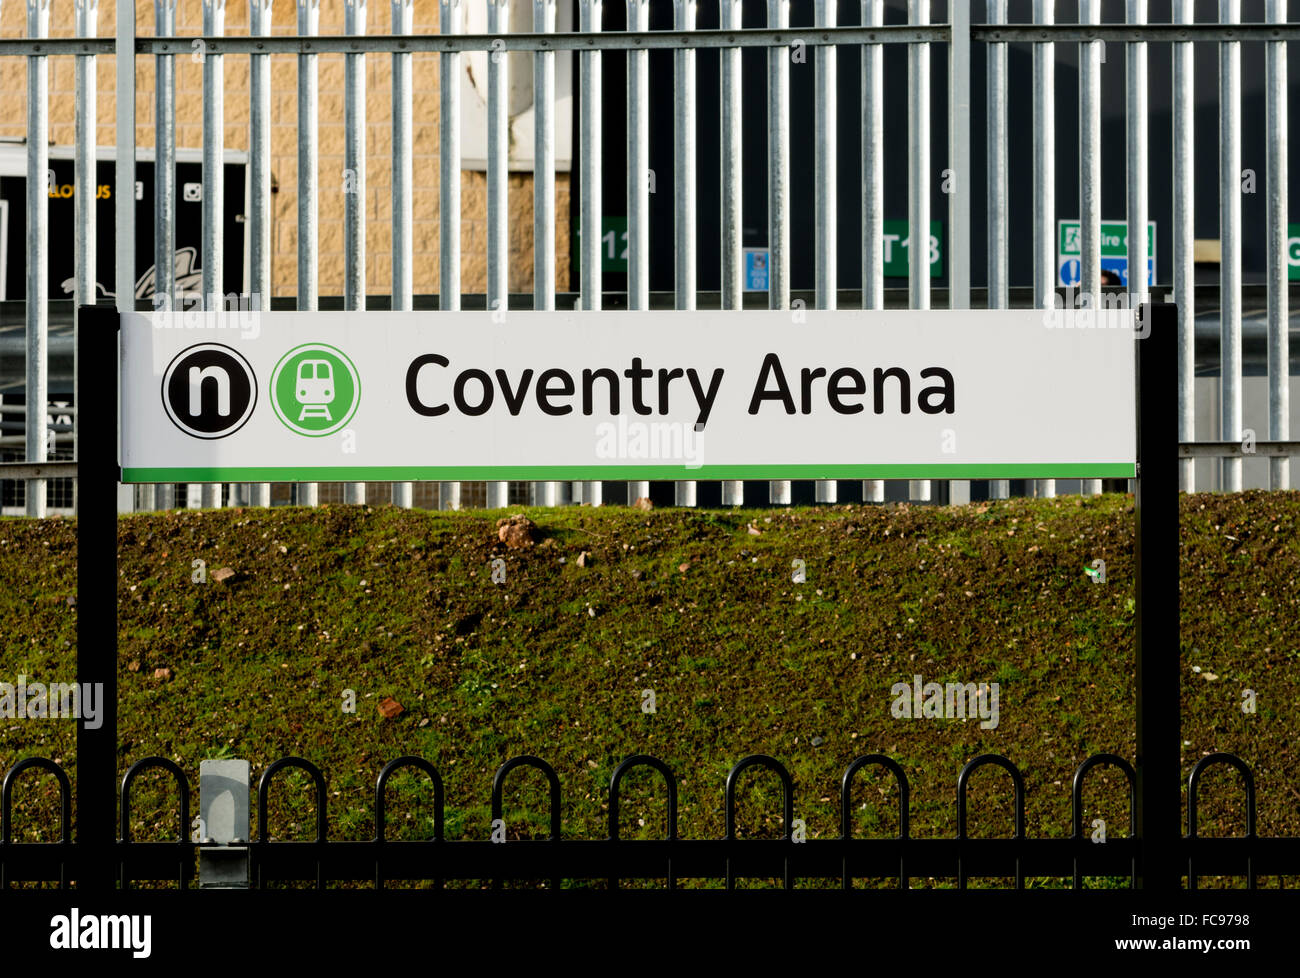 Coventry Arena railway station sign, Coventry, UK Stock Photo